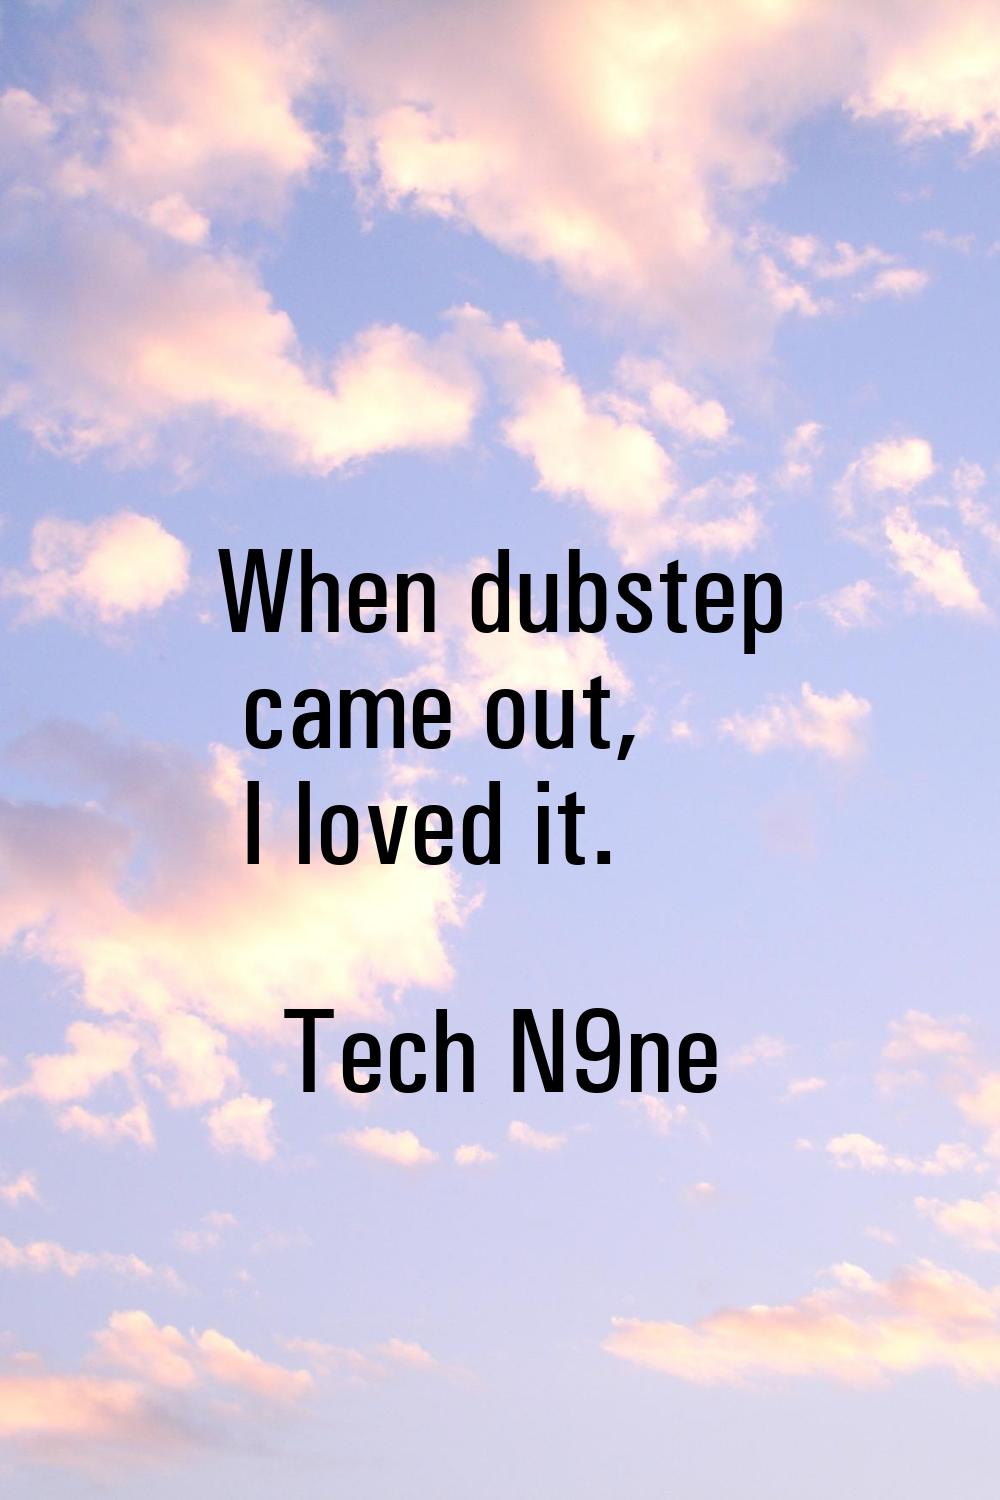 When dubstep came out, I loved it.